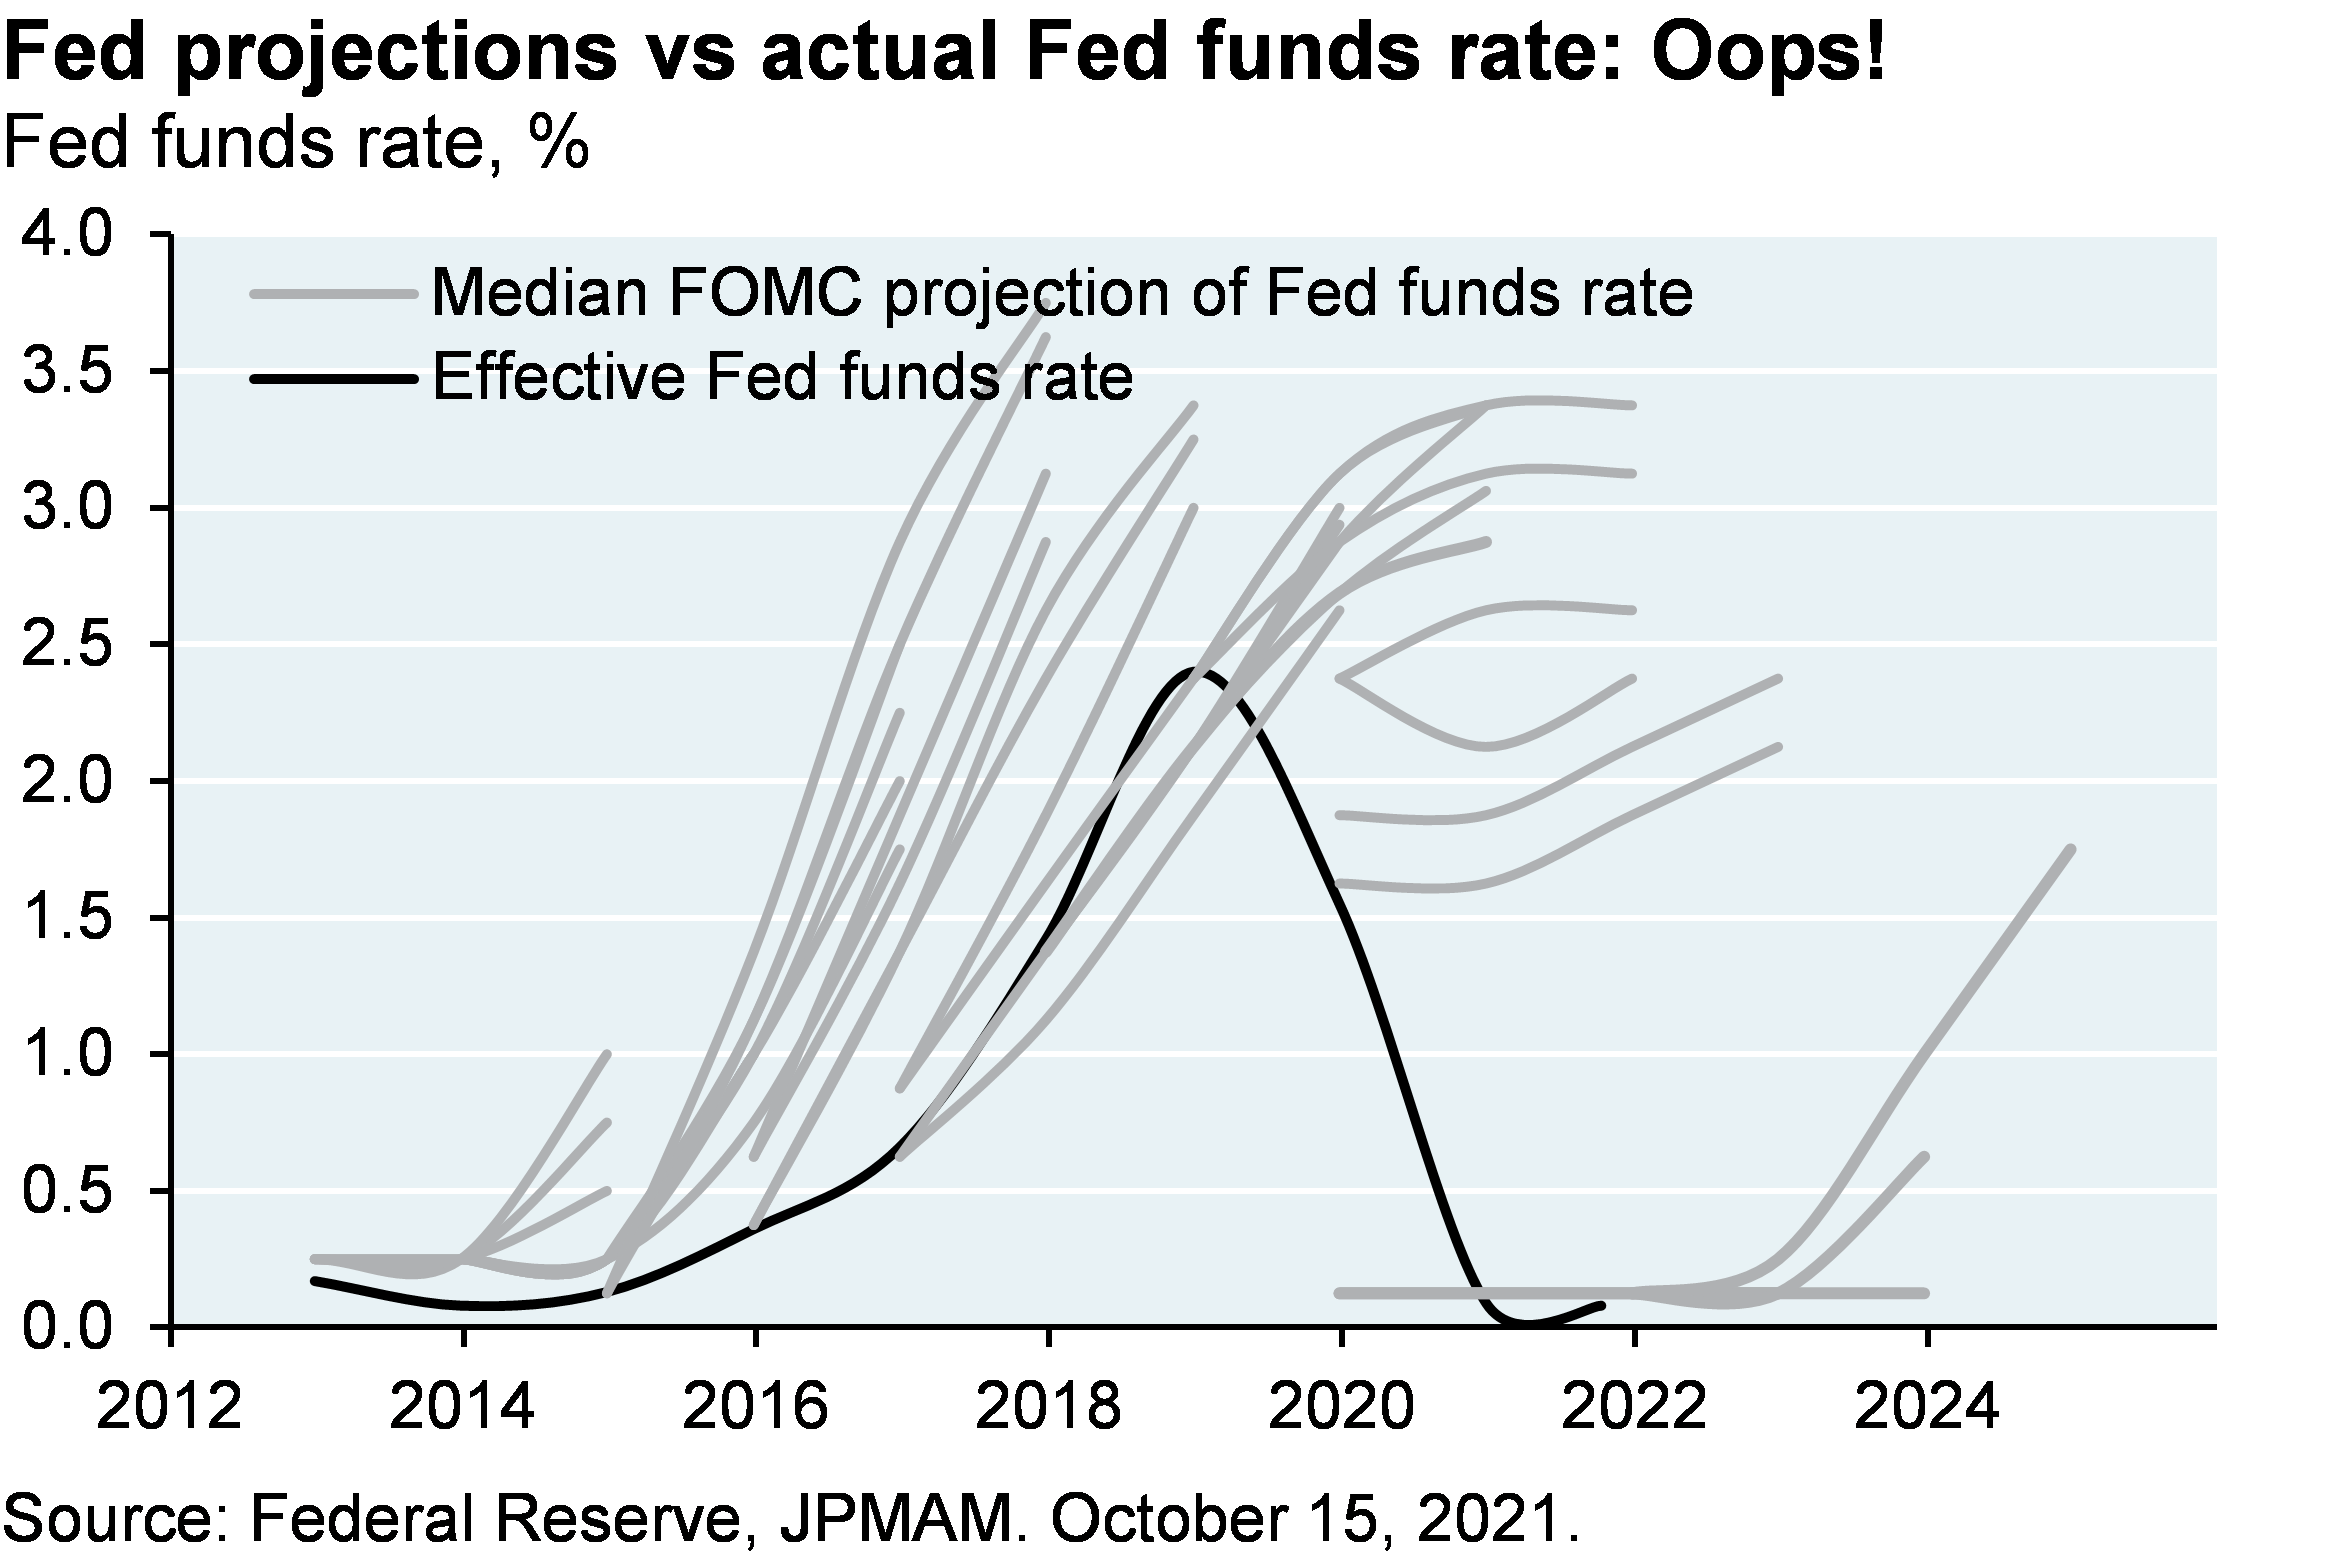 Fed projections vs actual Fed funds rate: Oops!